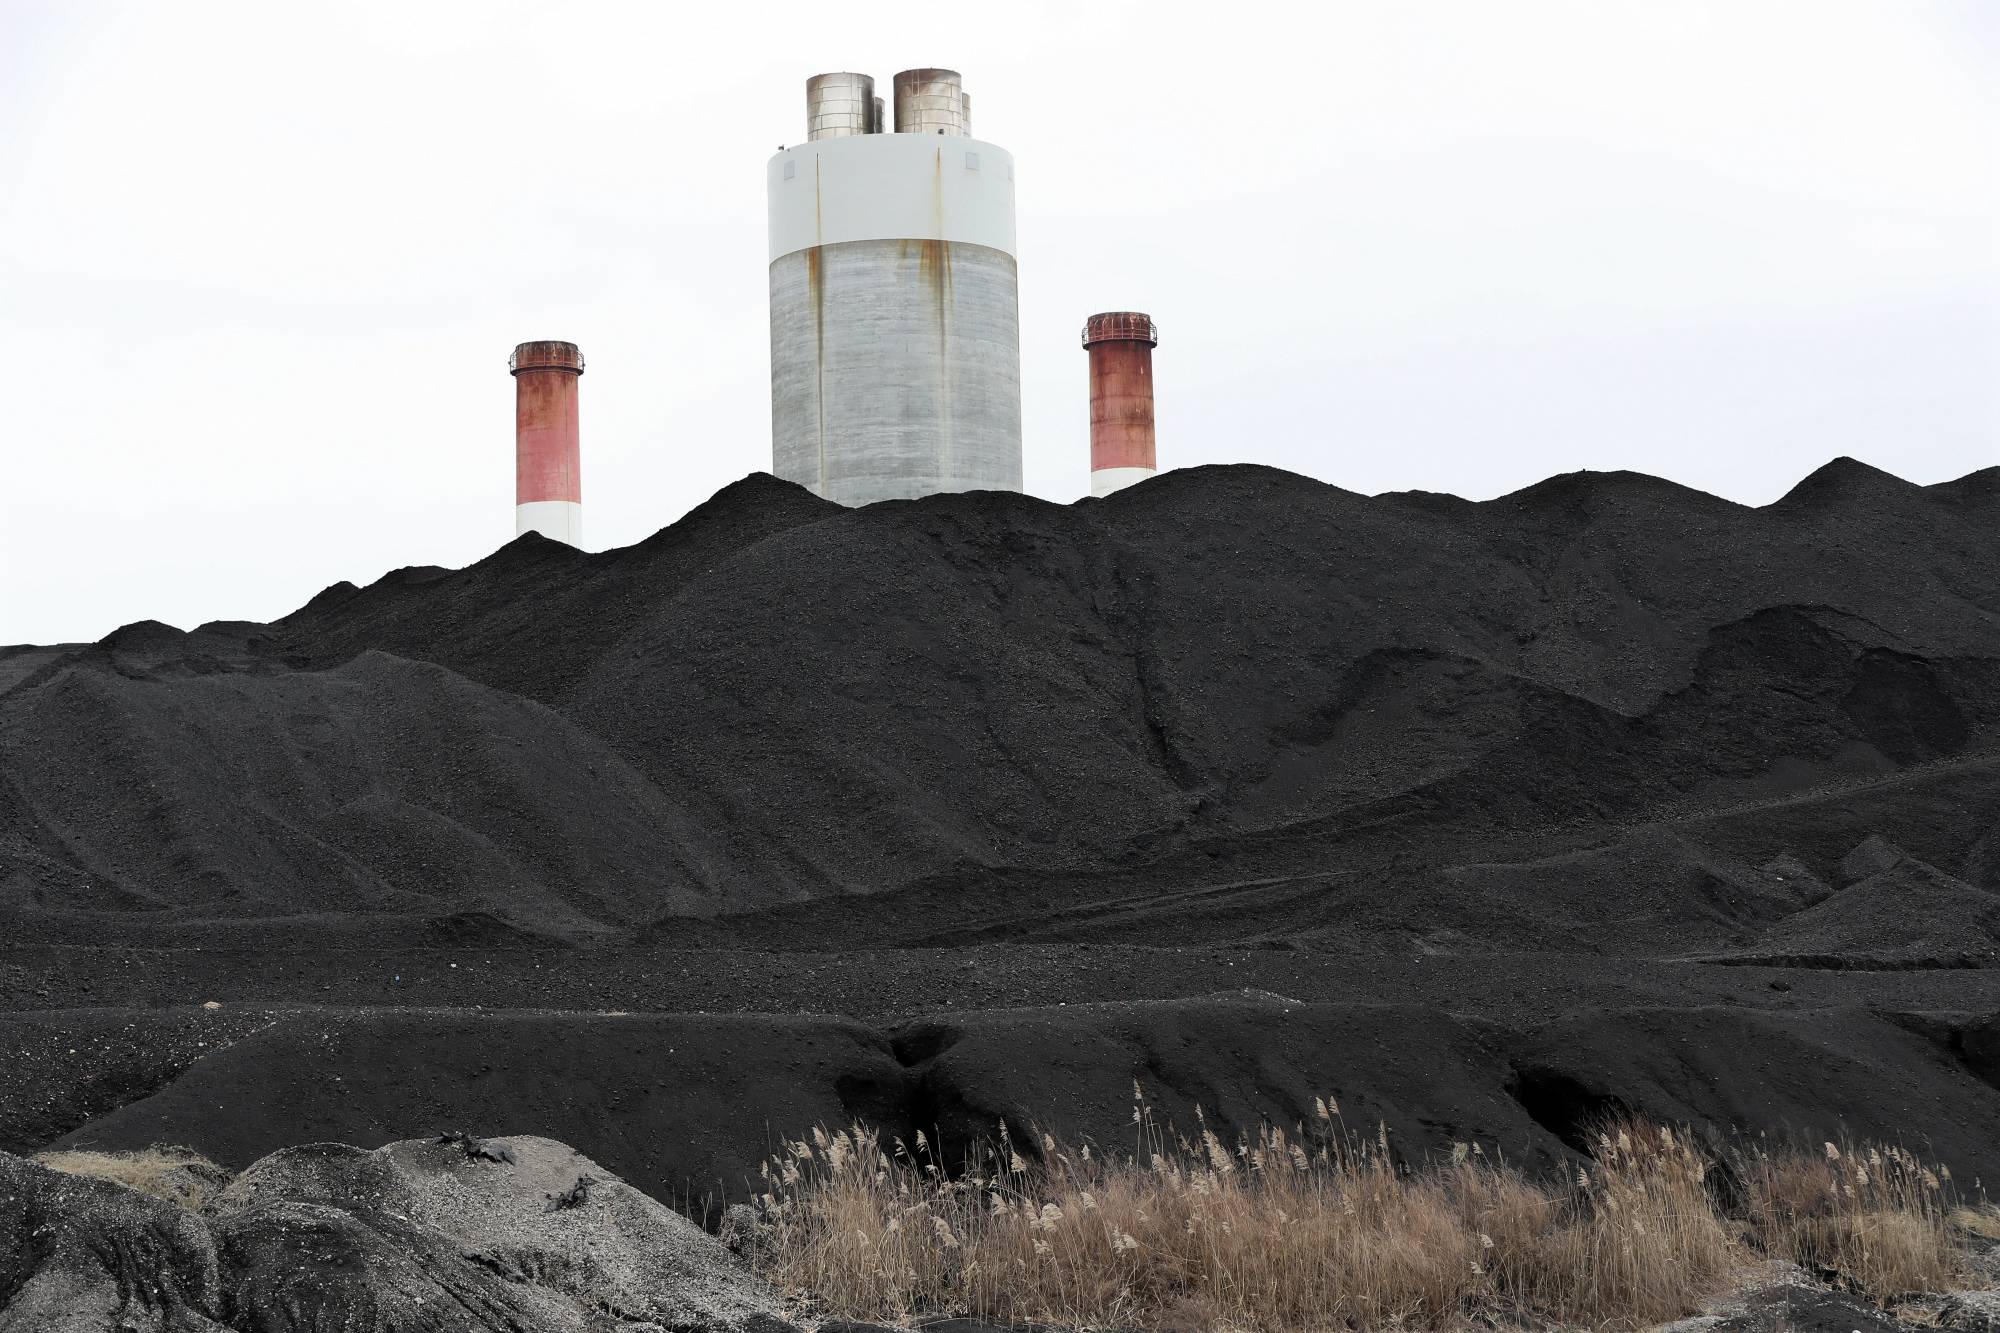 This Jan. 25, 2017, photo shows coal piled at the Gallatin Fossil Plant in Gallatin, Tenn. Environmental groups are taking the Tennessee Valley Authority, the nation's largest public utility, to trial over whether waste from the coal-fired power plant near Nashville polluted the Cumberland River. A trial opens Monday, Jan. 30, in federal court in Nashville as the groups claim coal ash waste illegally seeped into the Cumberland River. (AP Photo/Mark Humphrey)